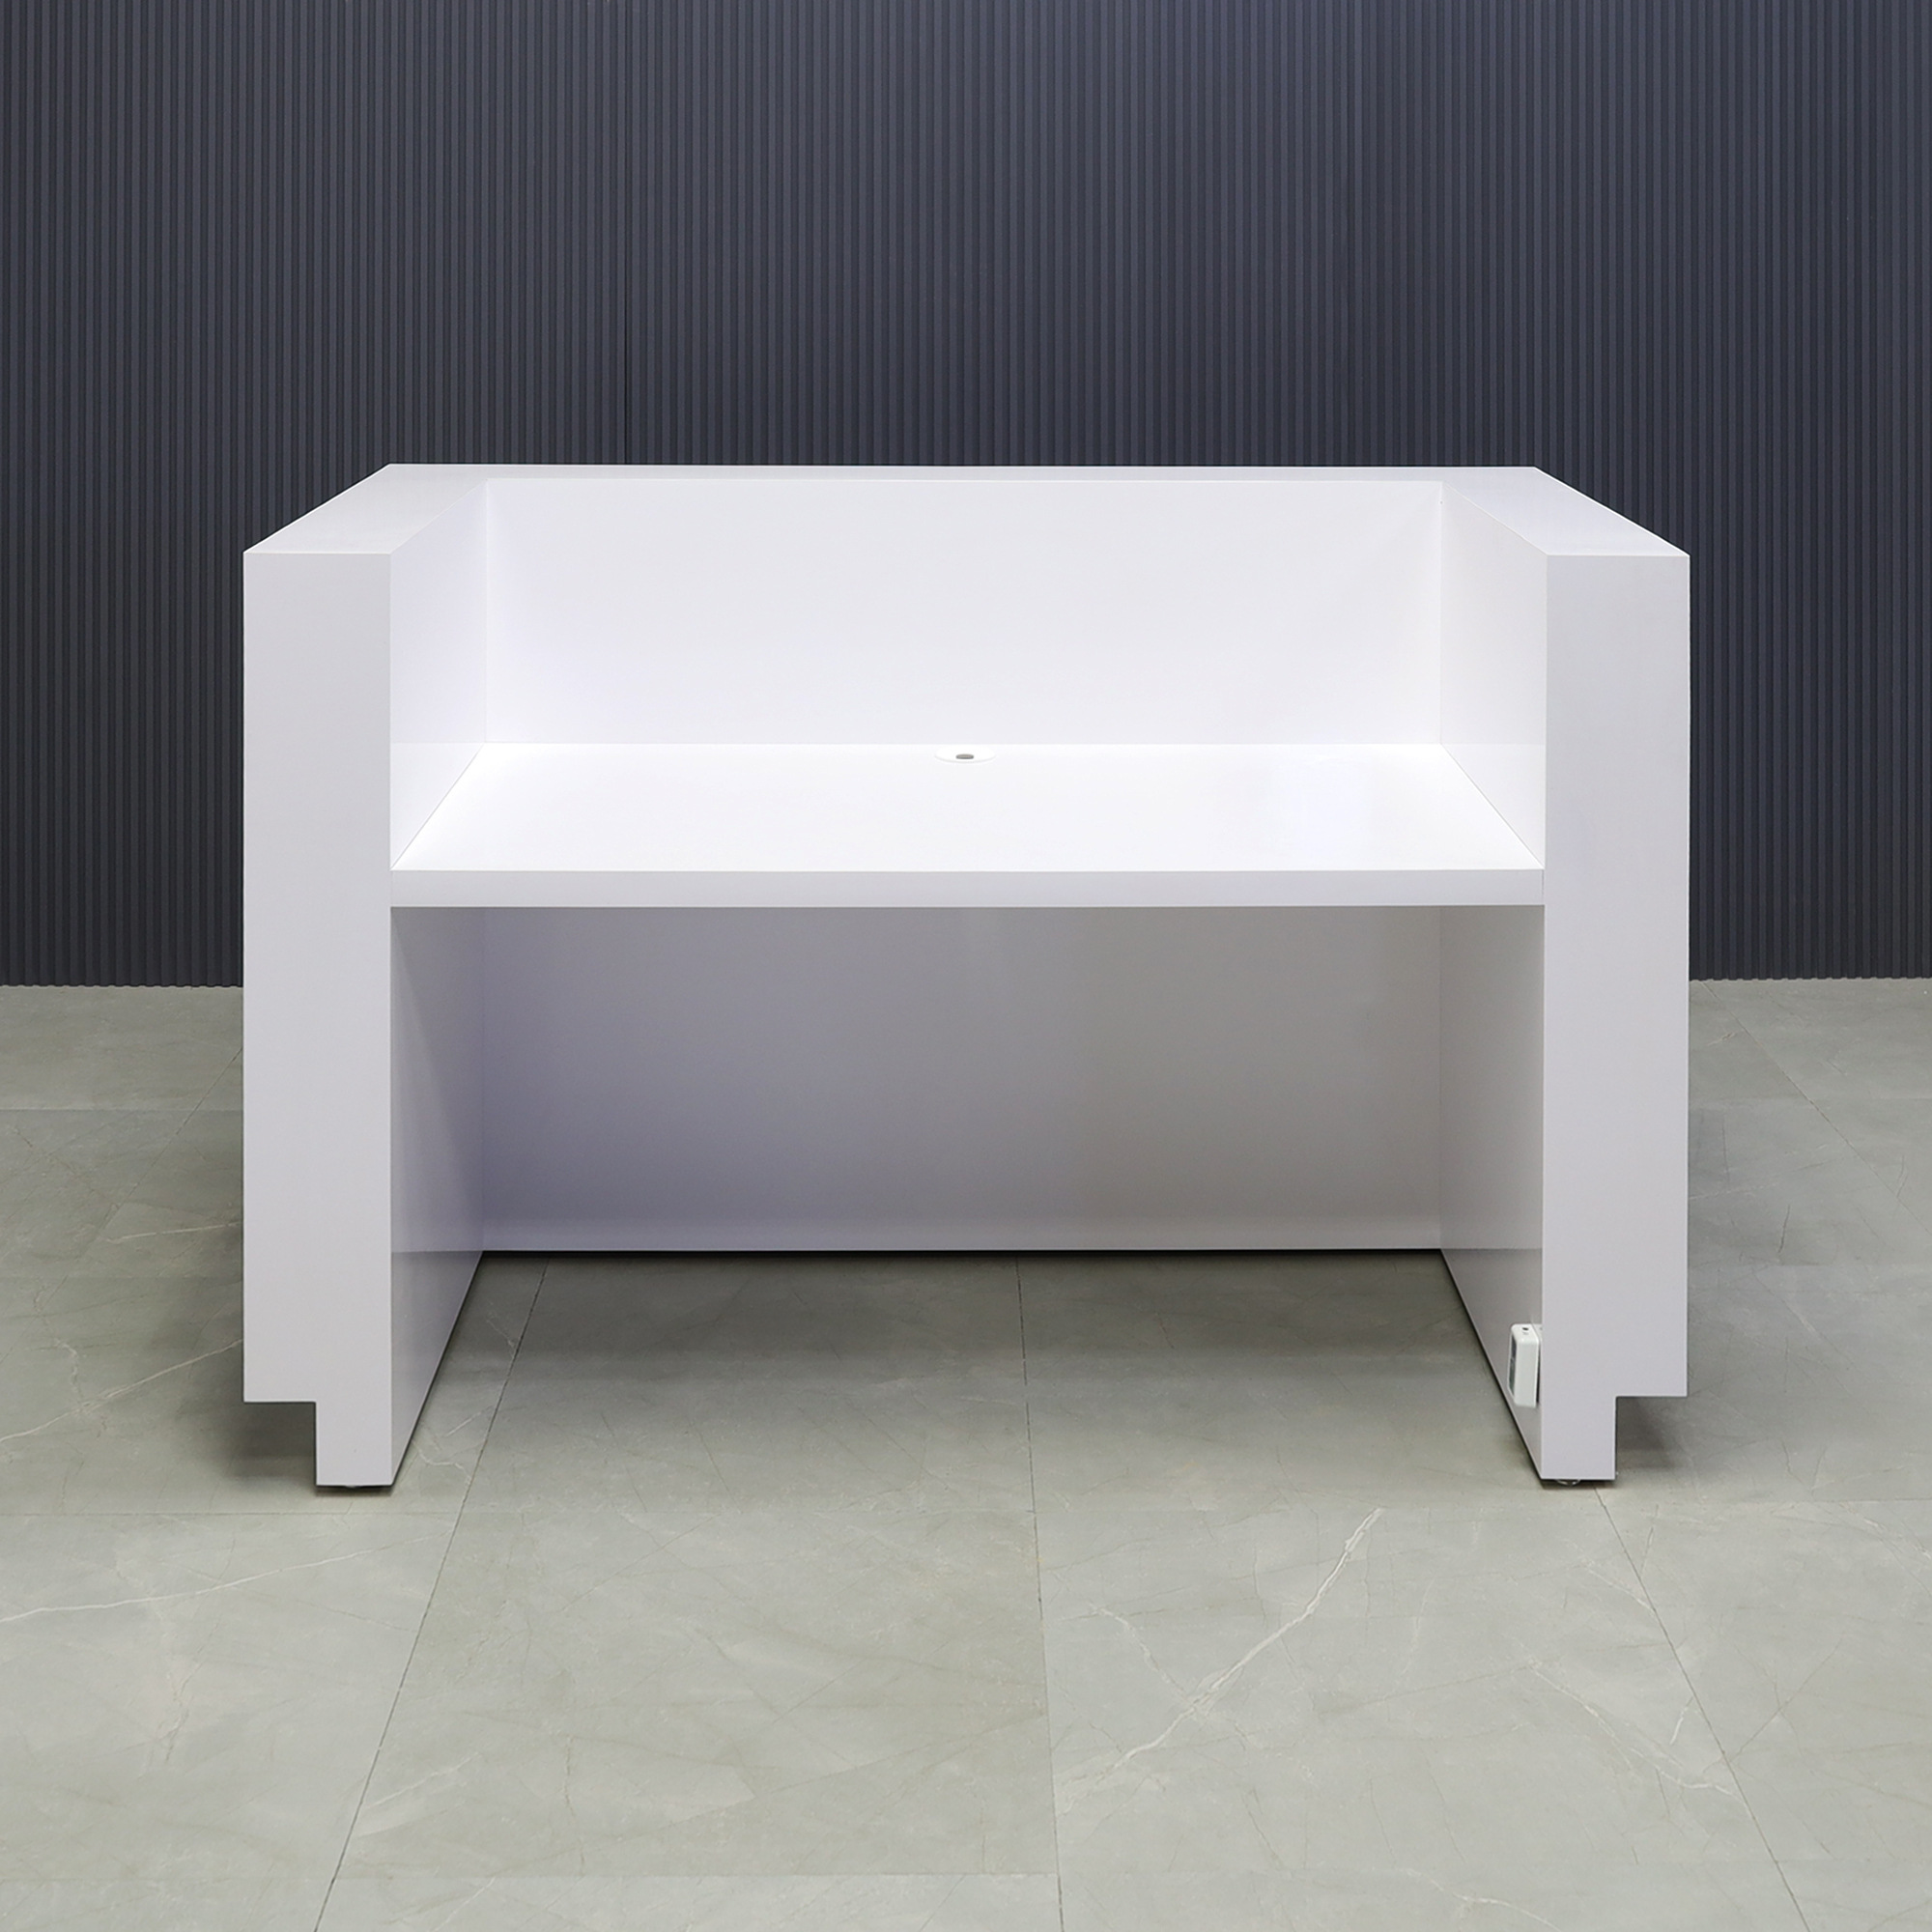 60-inch Dallas U-Shape Reception Desk in white gloss laminate main desk and brushed aluminum toe-kick, with color LED, shown here.